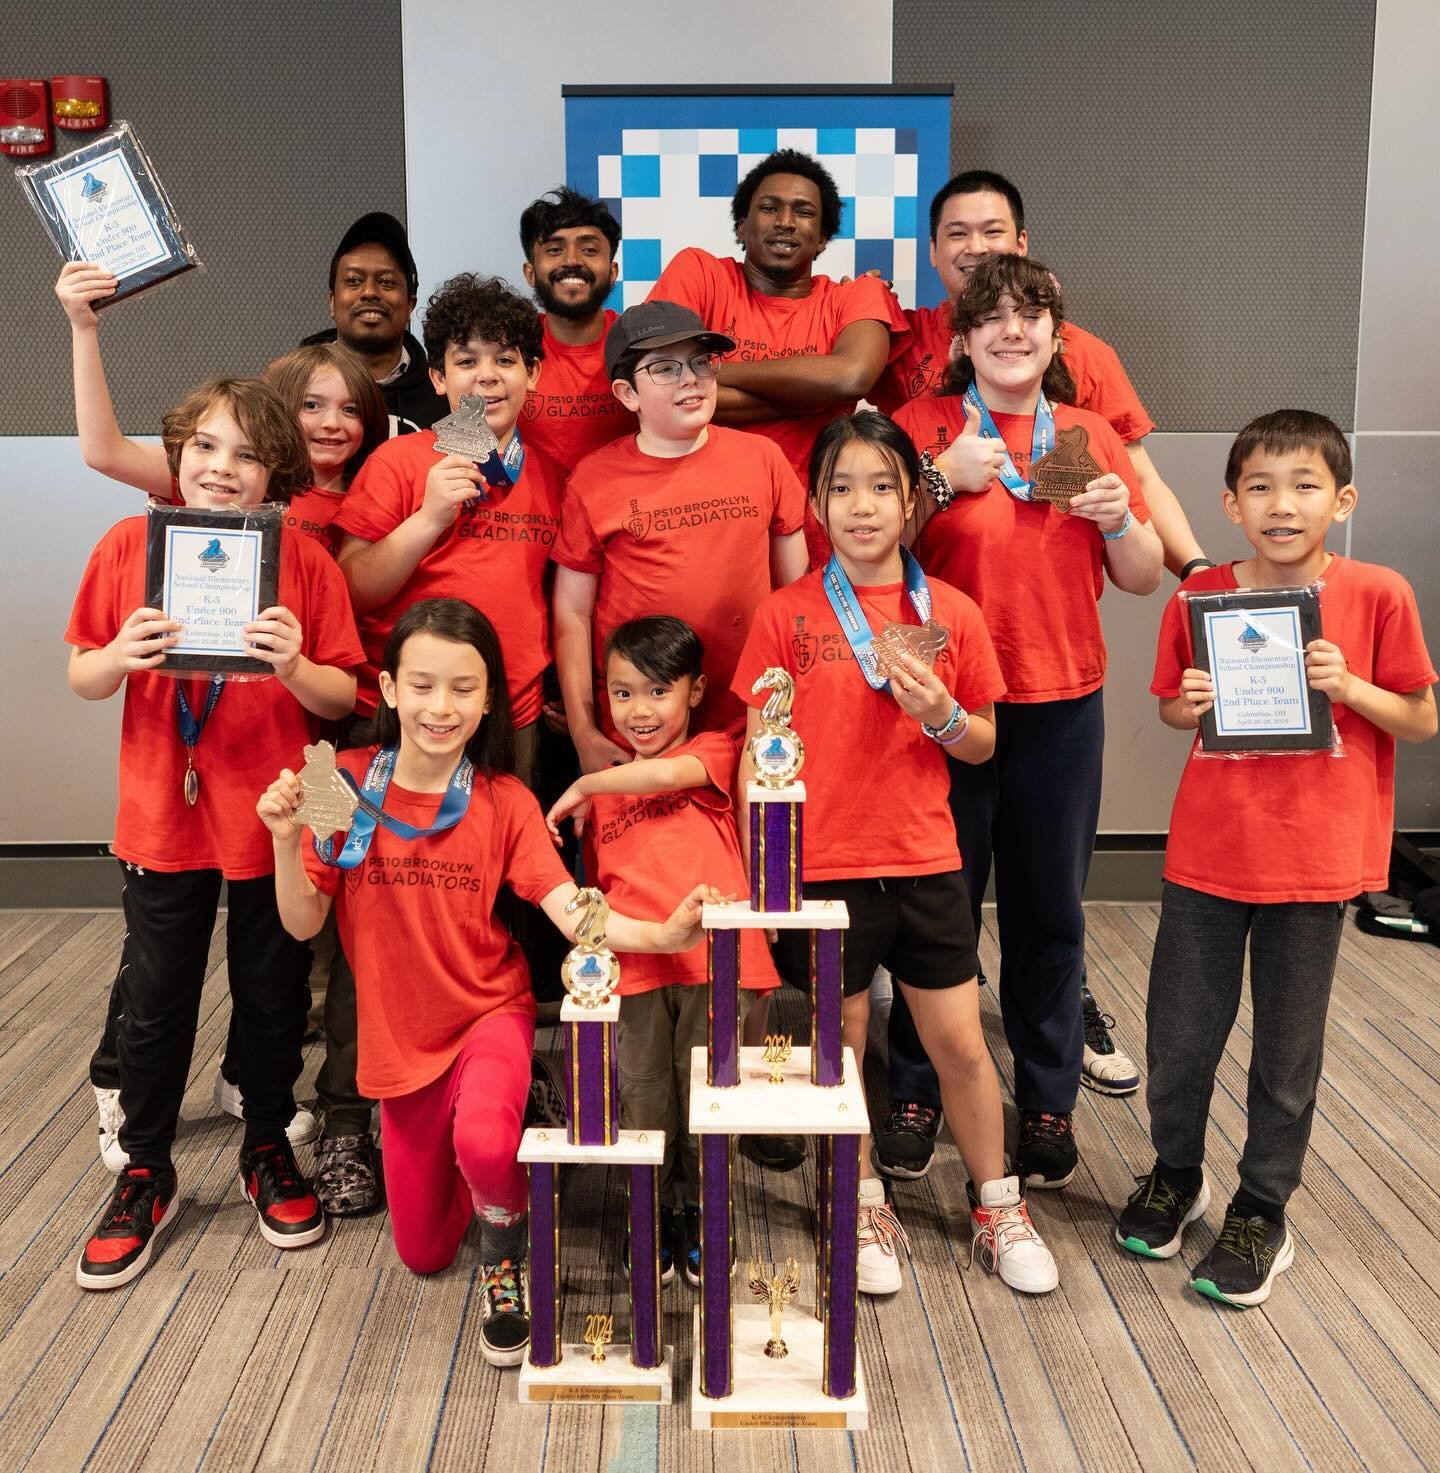 Congratulations to our PS 10 Gladiators for their outstanding performance at the 2024 Elementary Nationals! They secured 2nd place in K5 U900 and 7th place in K6 U1400!

Grant went undefeated with 6.5 points to place 2nd &amp; Josie tied for 3rd with